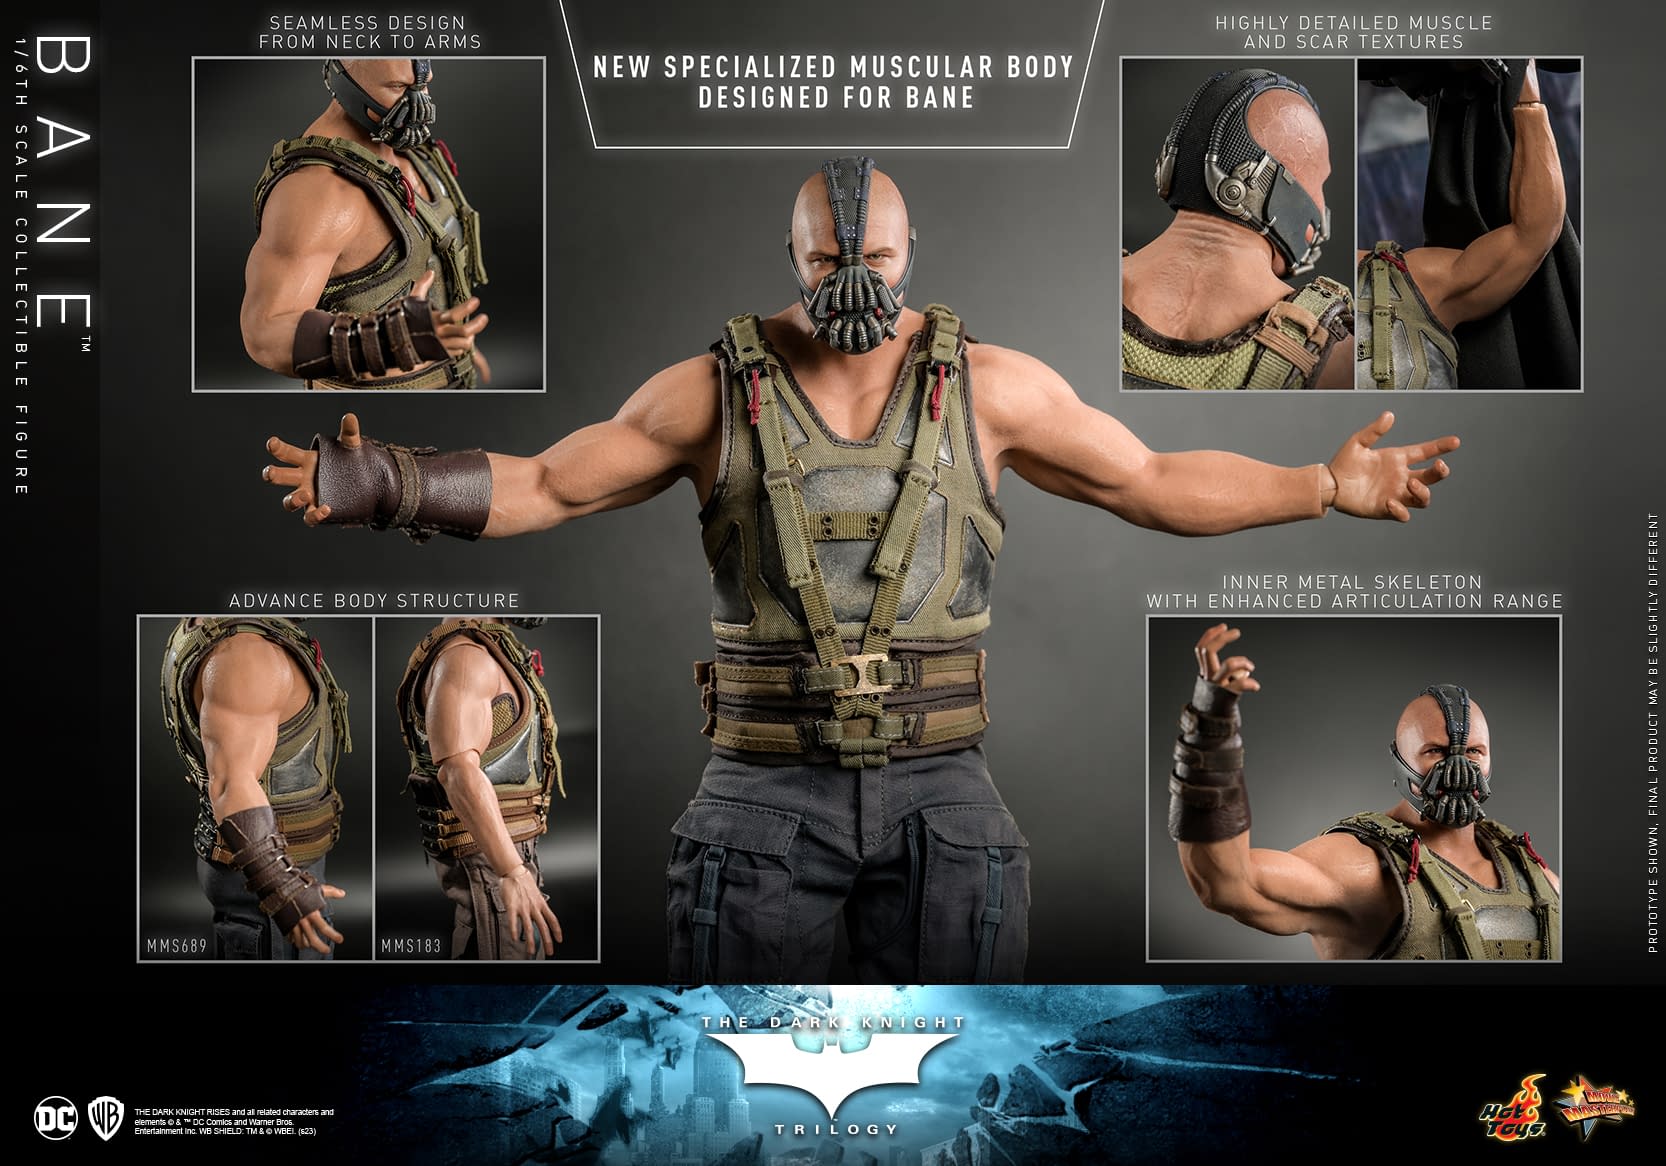 The Dark Knight Rises Bane 1/6 Scale Figure Returns to Hot Toys